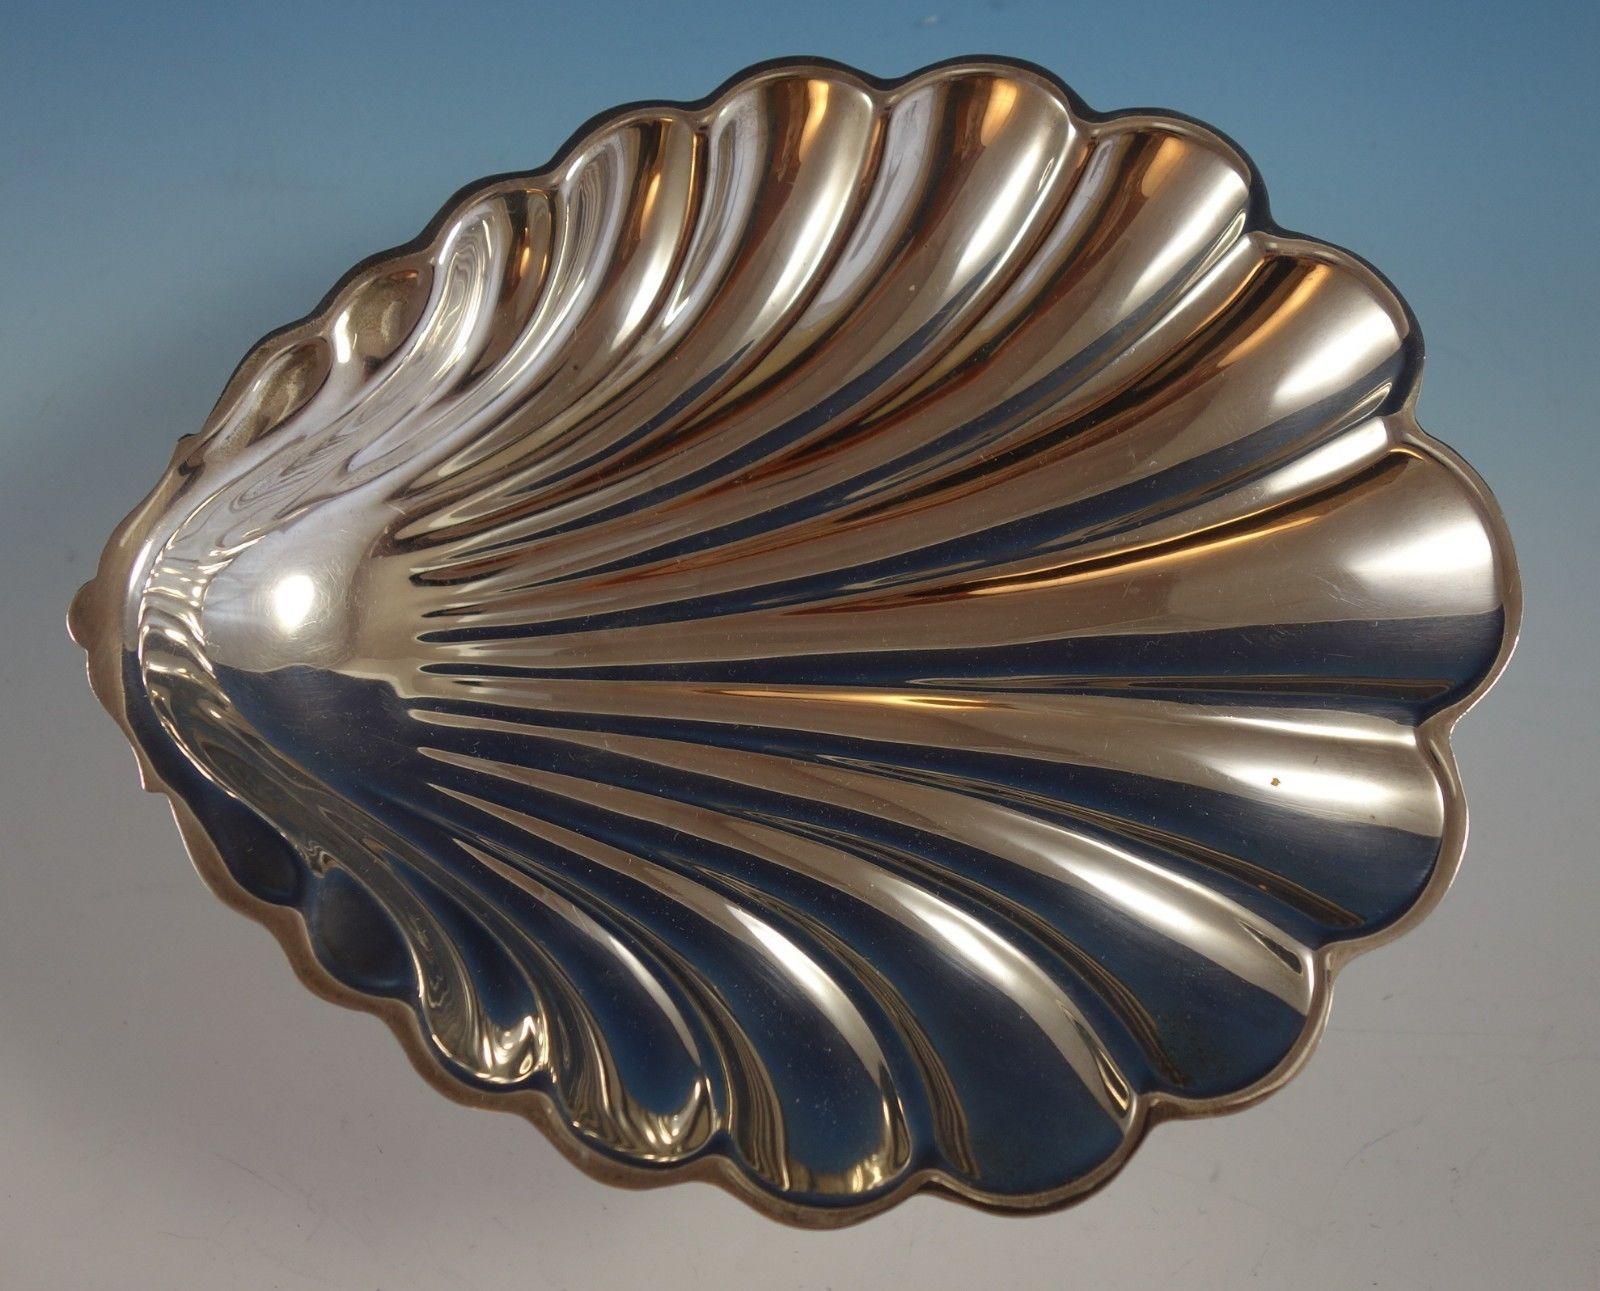 Beautiful Gorham sterling silver shell shaped dish with ball feet marked #42606. The dish measures 1 3/8